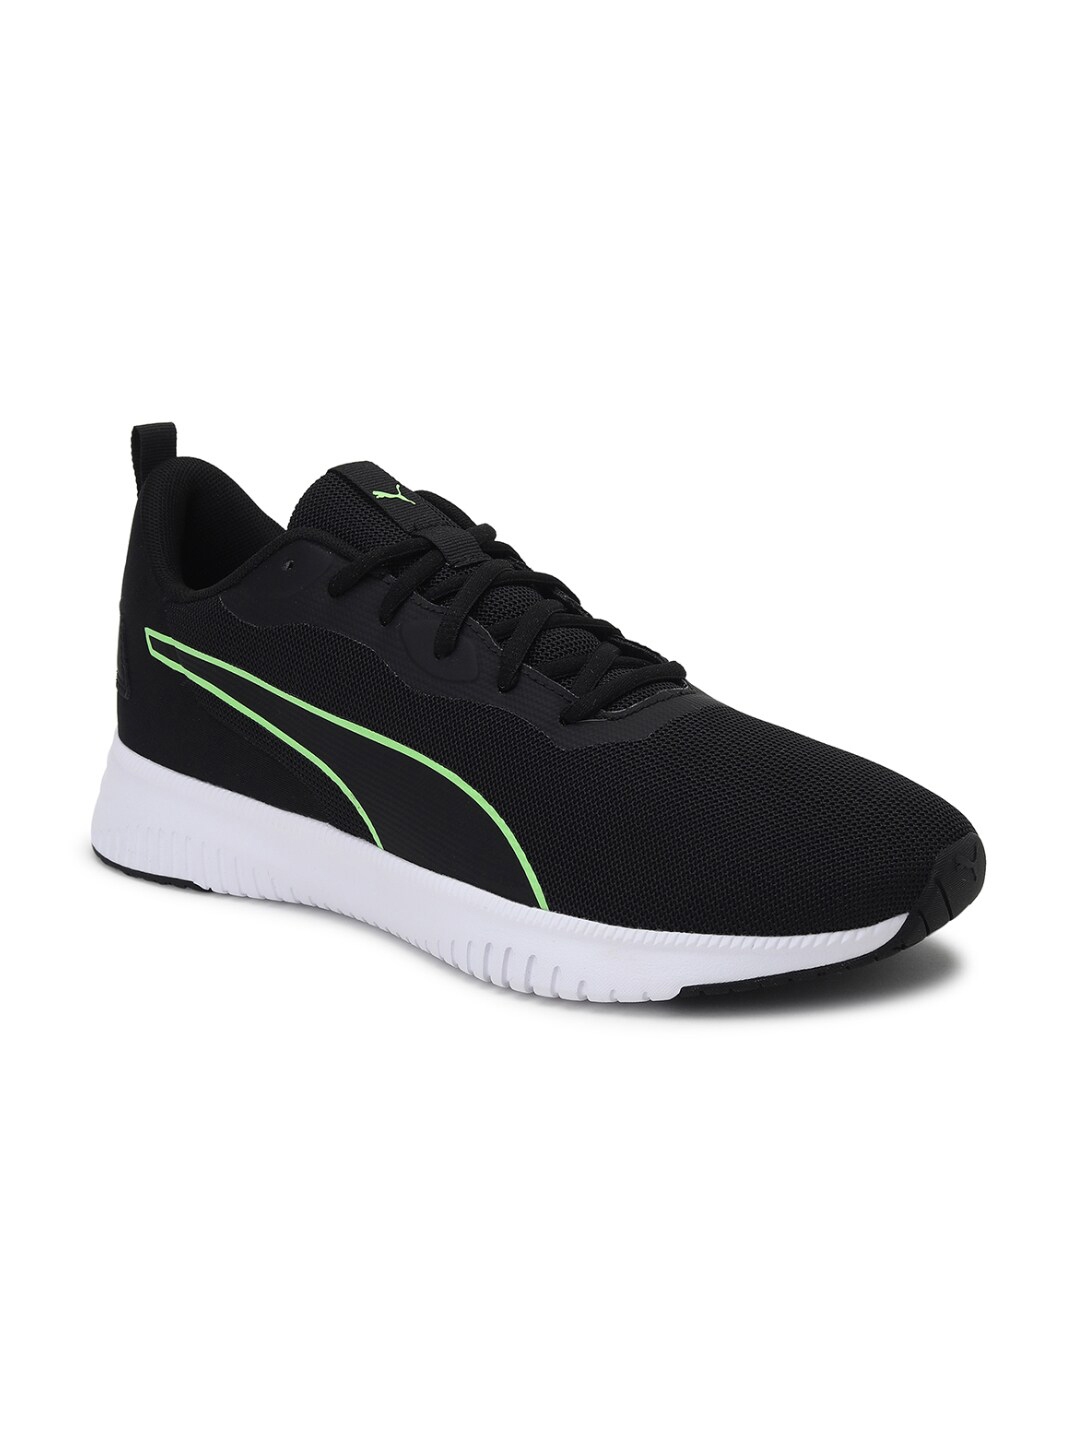 Buy Puma Unisex Black Flyer Flex Running Shoes - Sports Shoes for ...